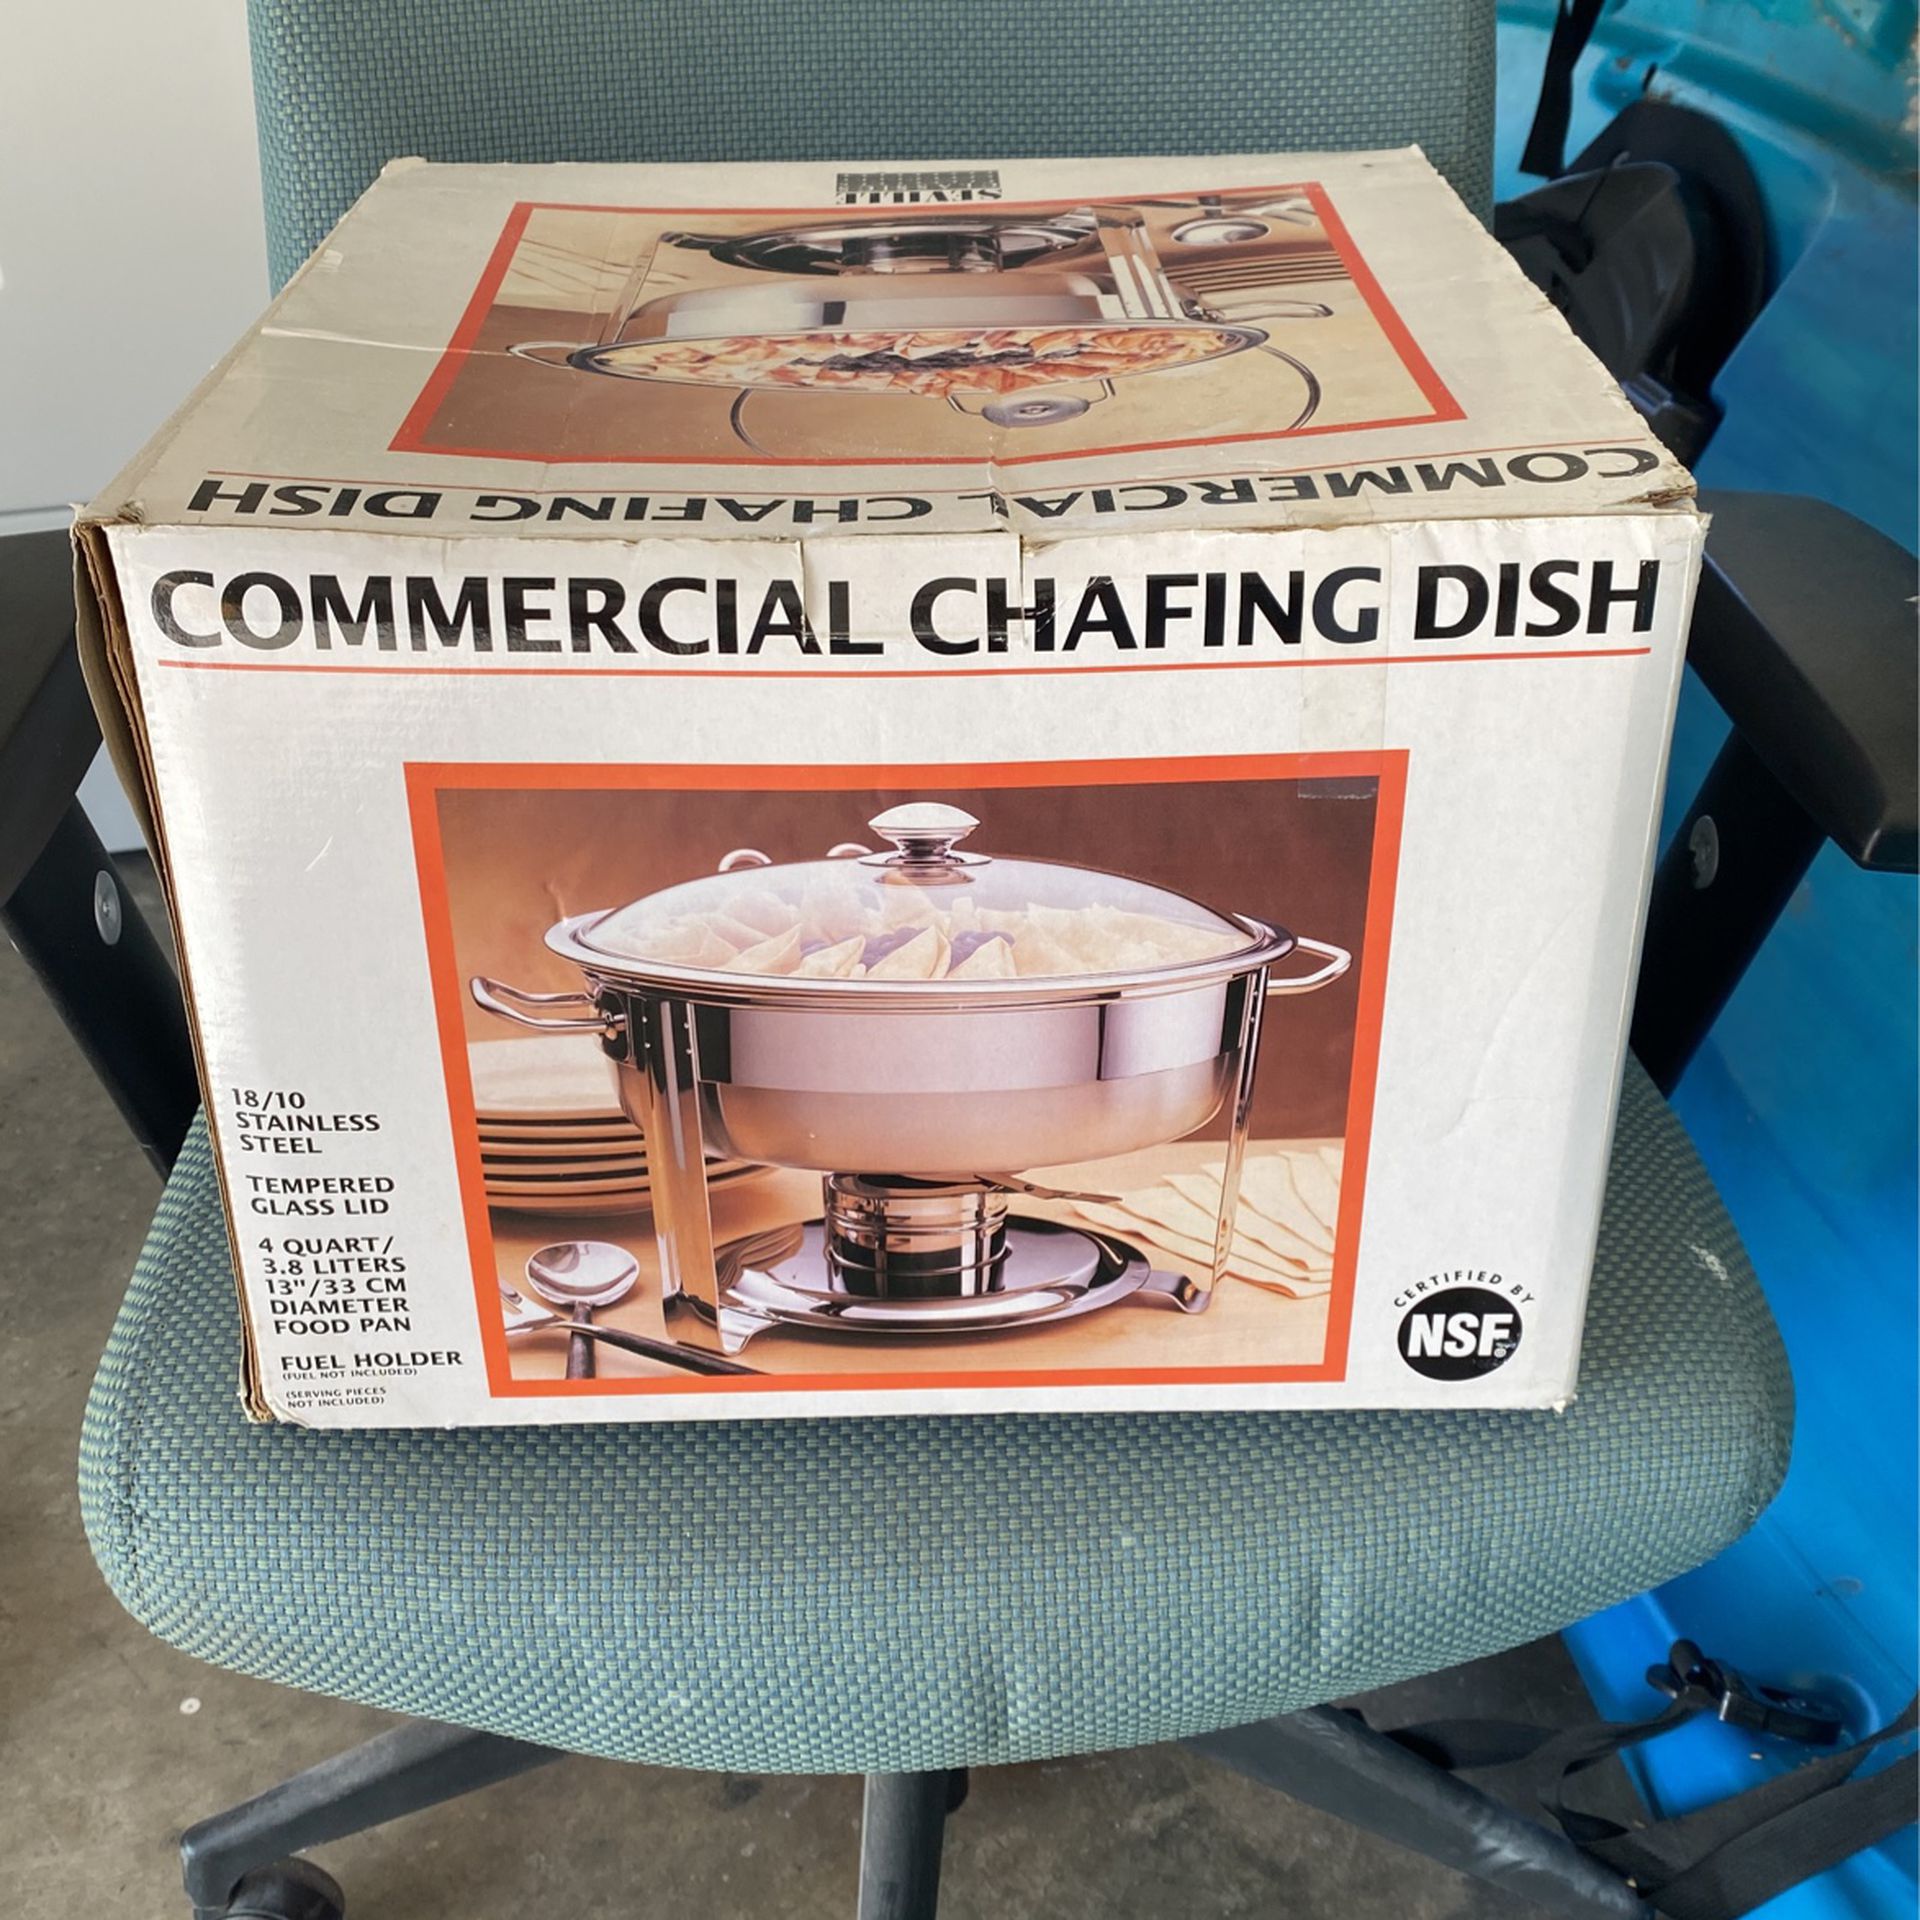 Commercial Chafing Dish